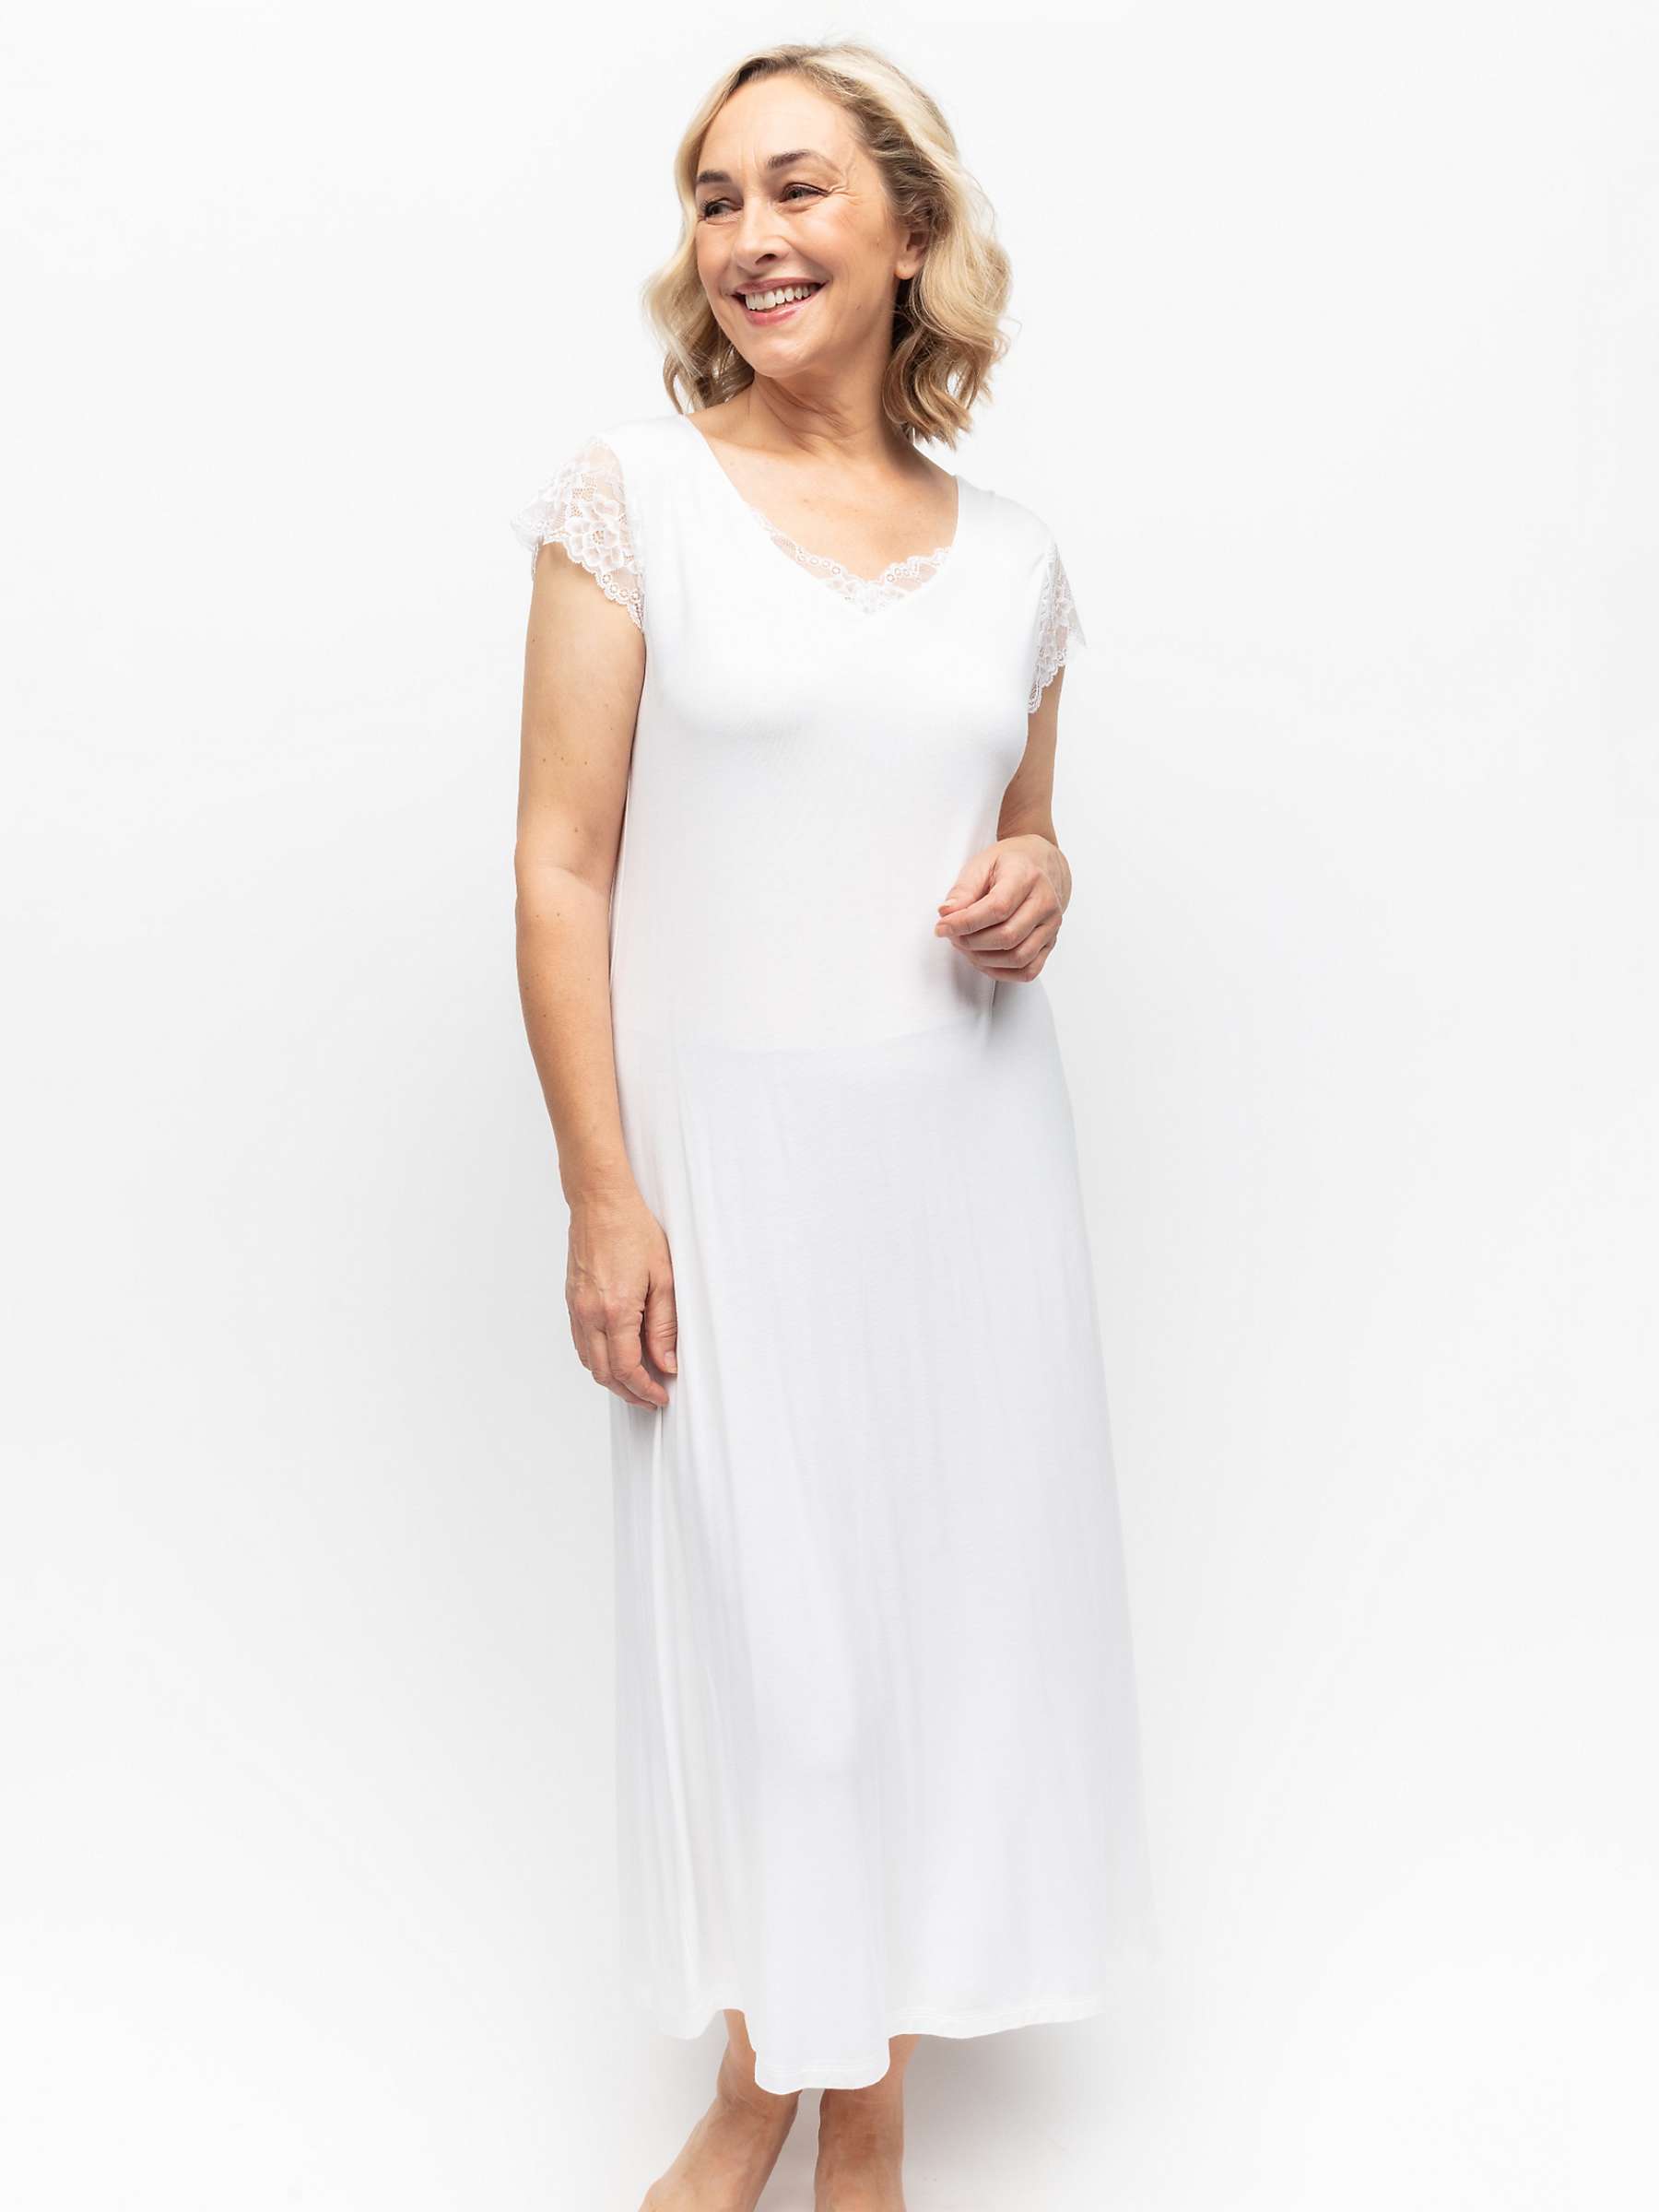 Buy Cyberjammies Tessa Jersey Lace Detail Maxi Nightdress, White Online at johnlewis.com